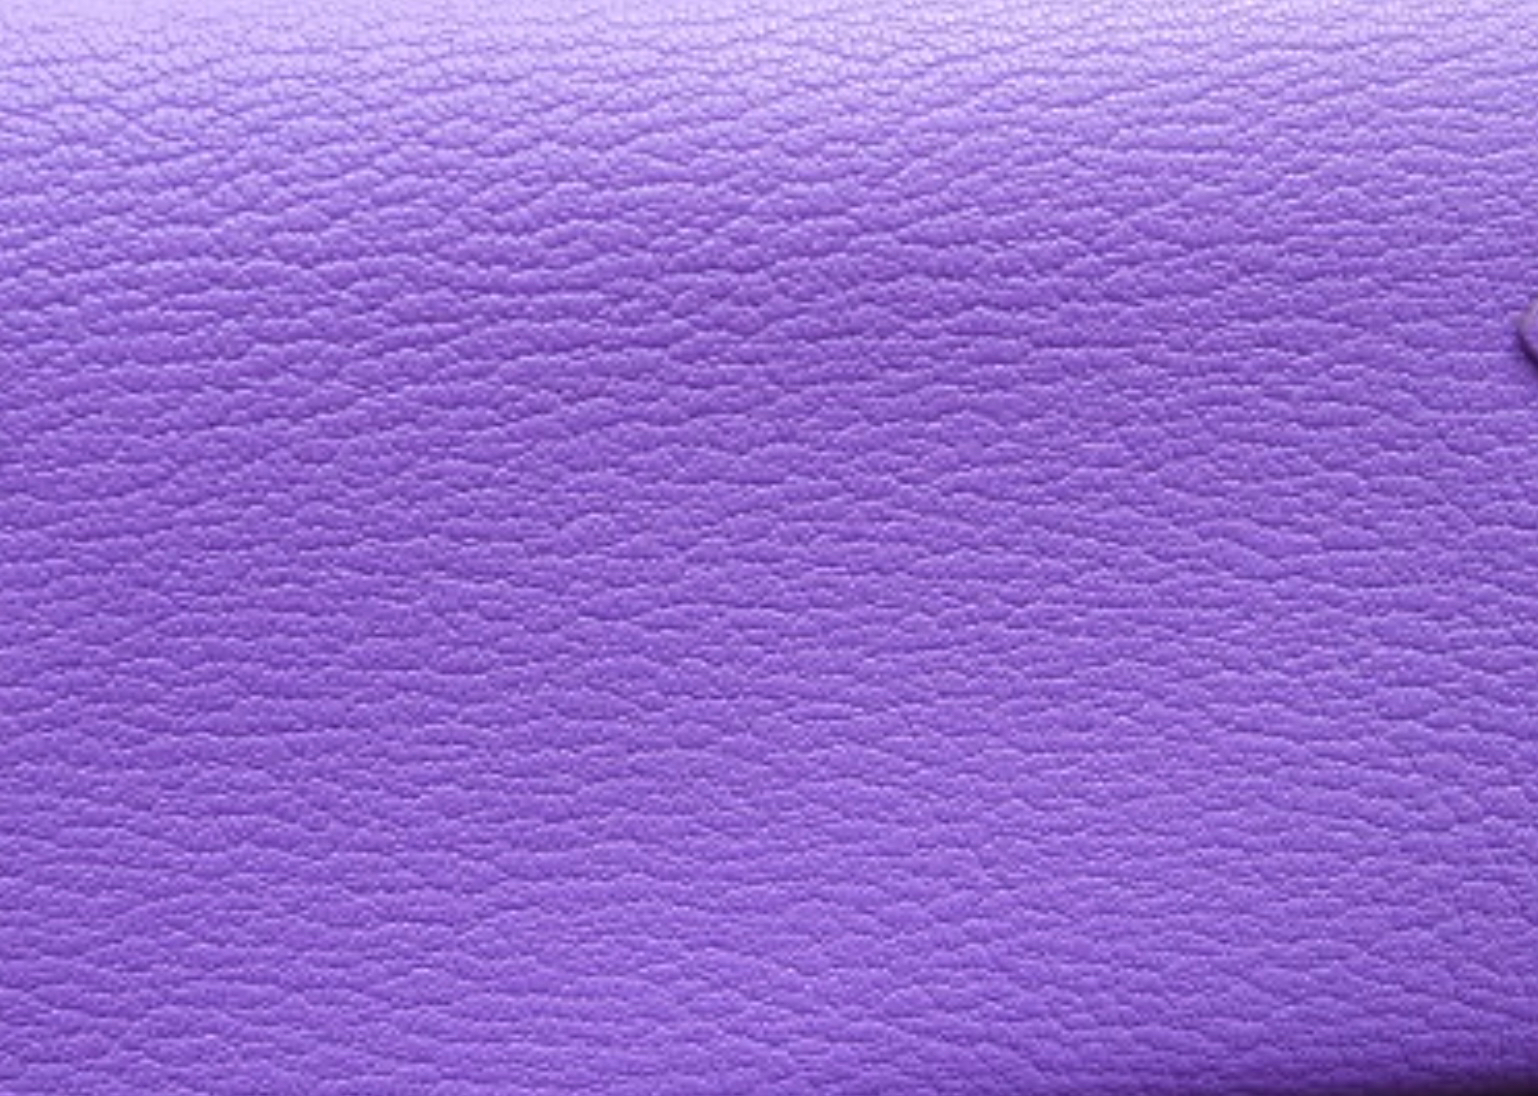 Which Hermès Colors Would Add the Most Value to Your Collection? - PurseBop